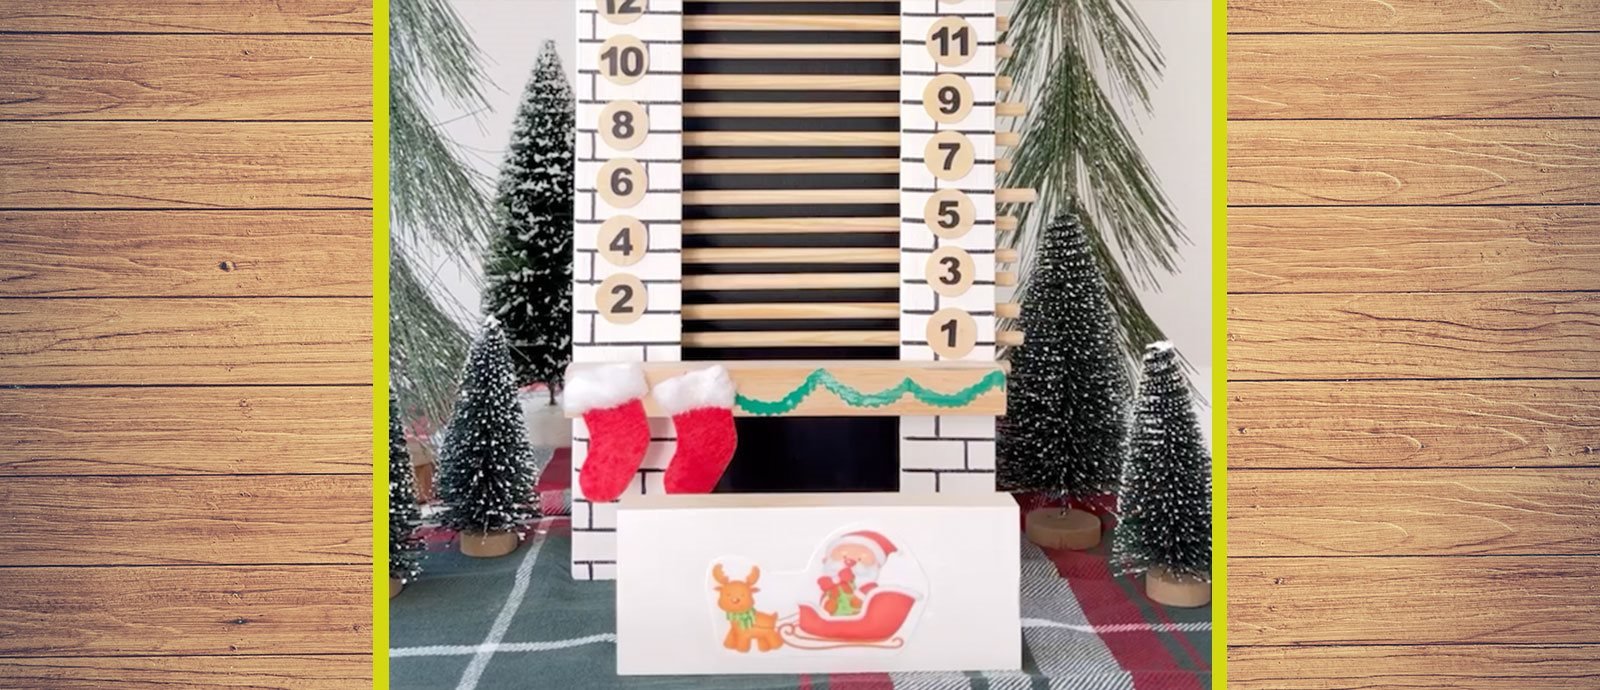 How to Build DIY CHRISTMAS COUNTDOWN DECORATION